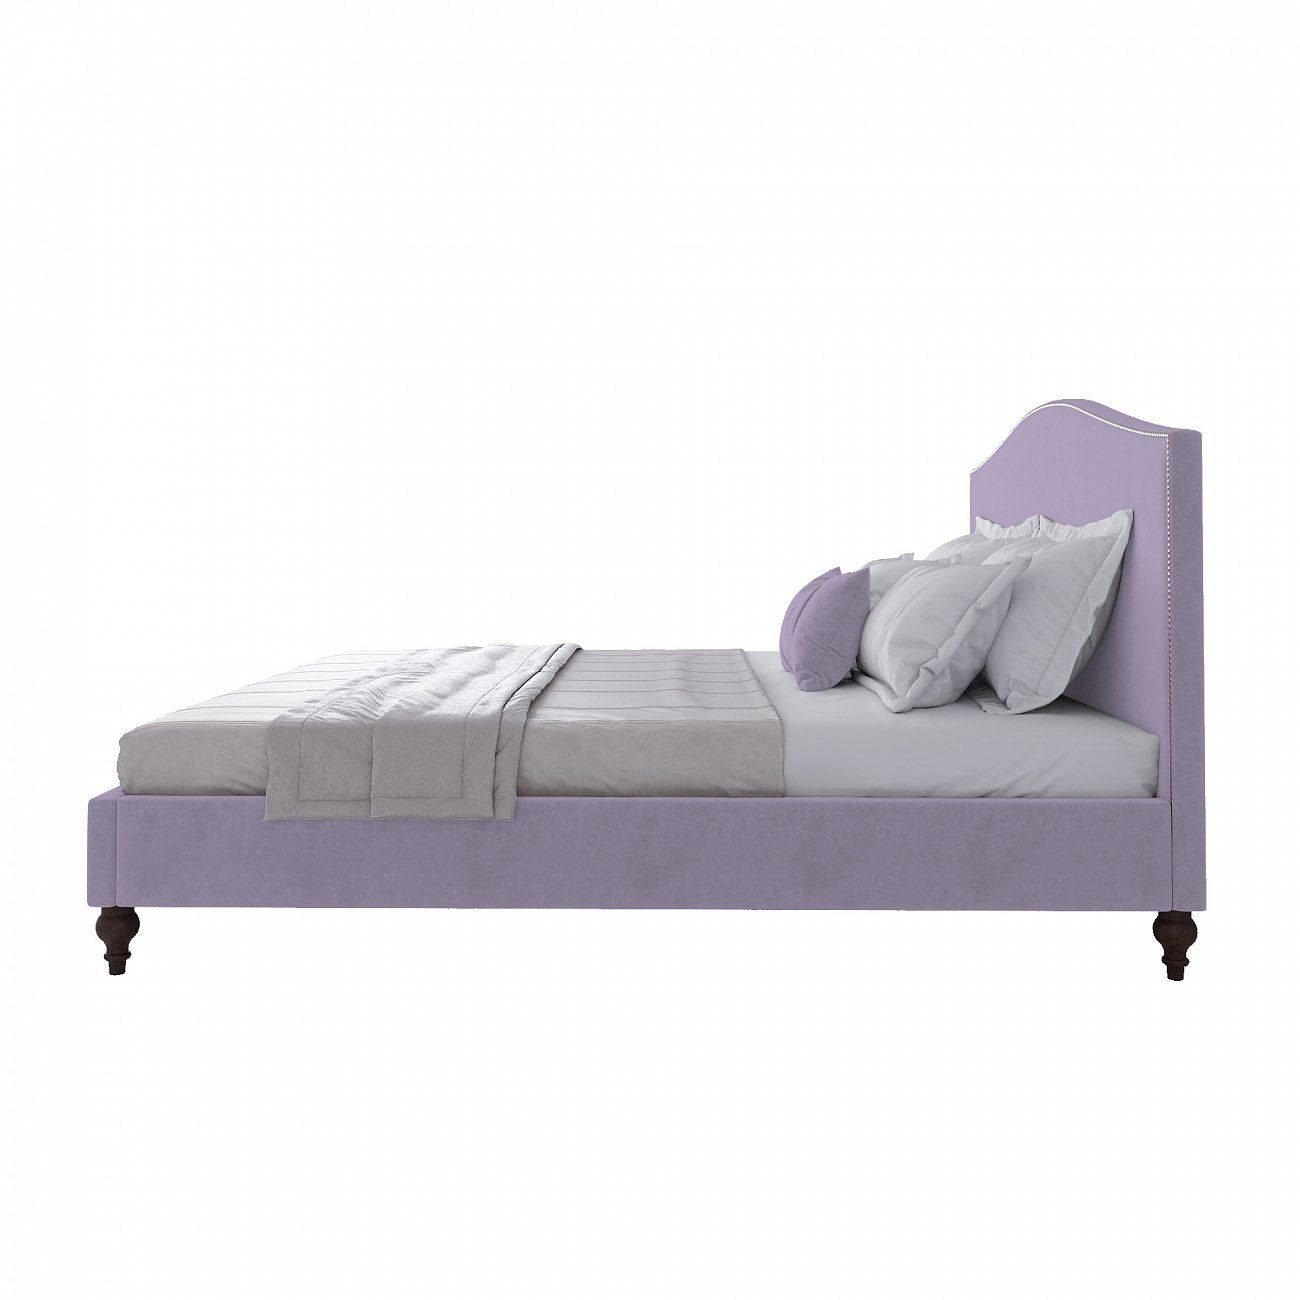 Double bed with upholstered headboard 180x200 cm lavender Fleurie P